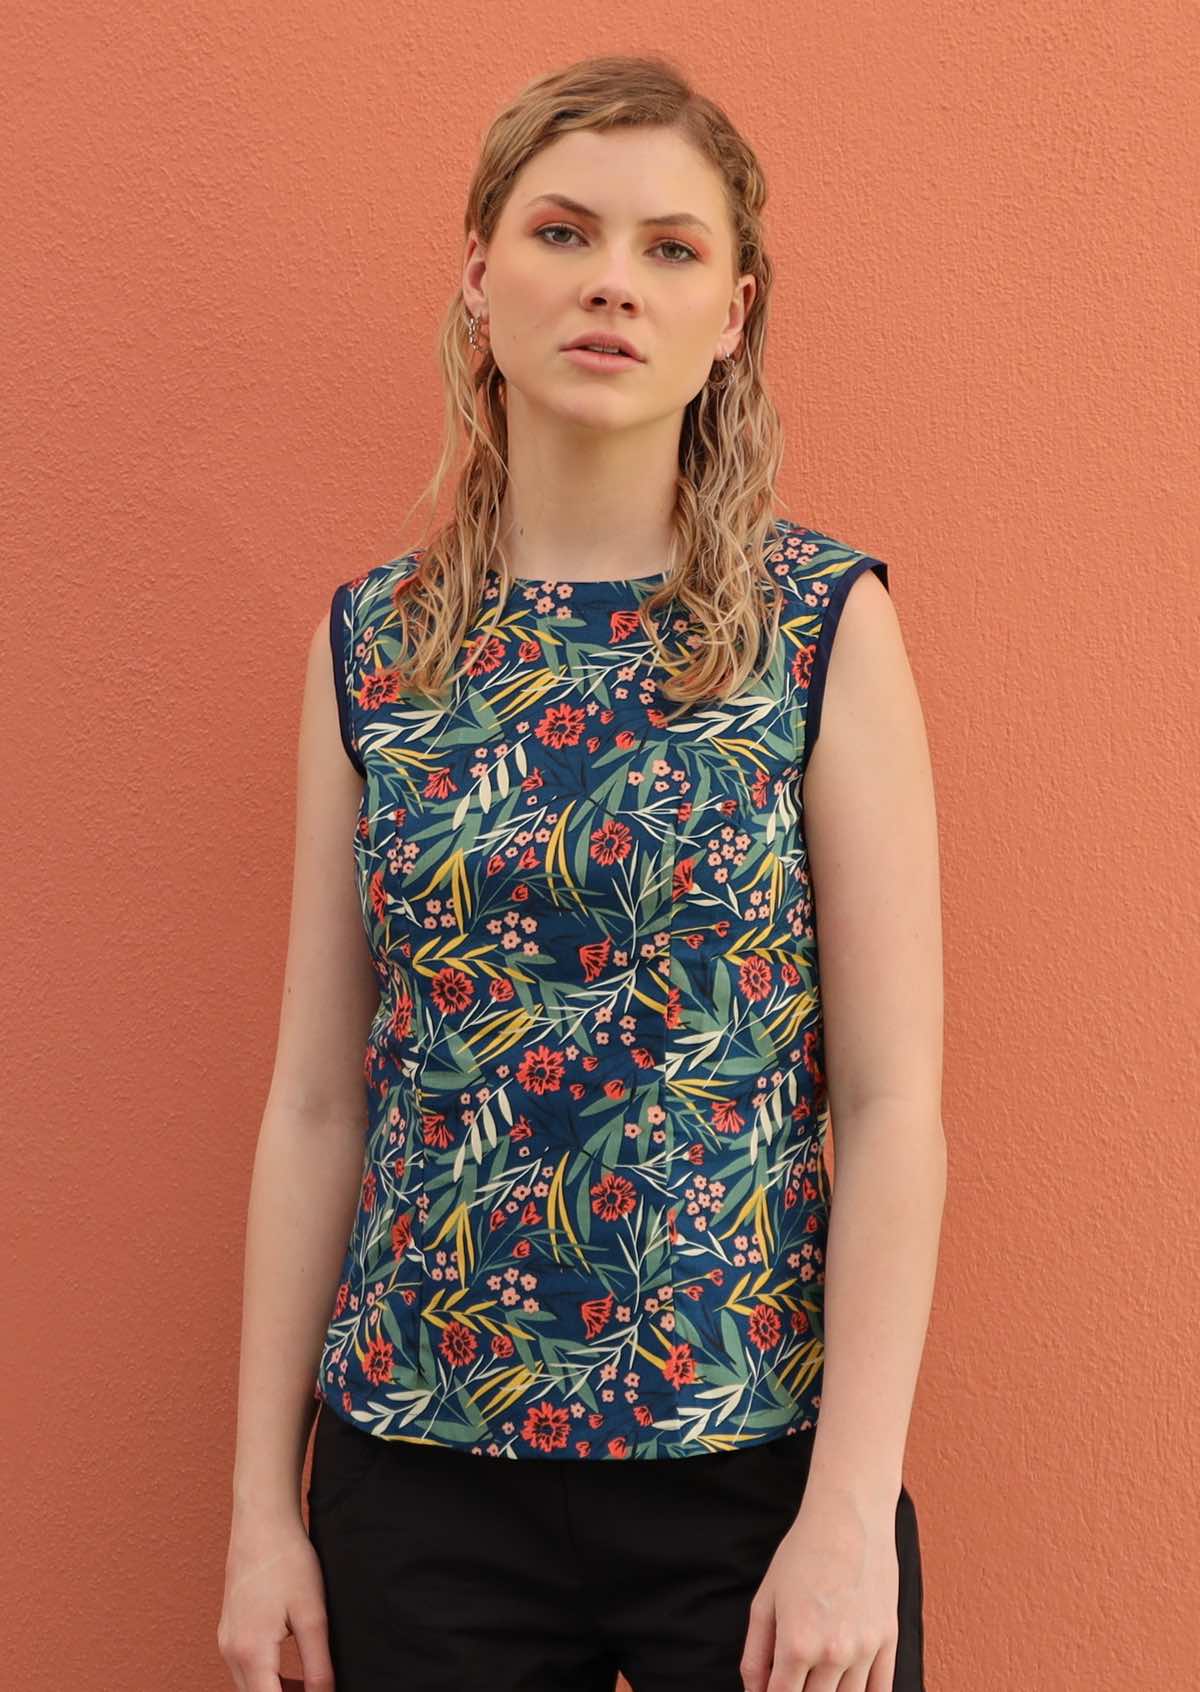 Blonde woman wears a colourful floral top with a blue base. 